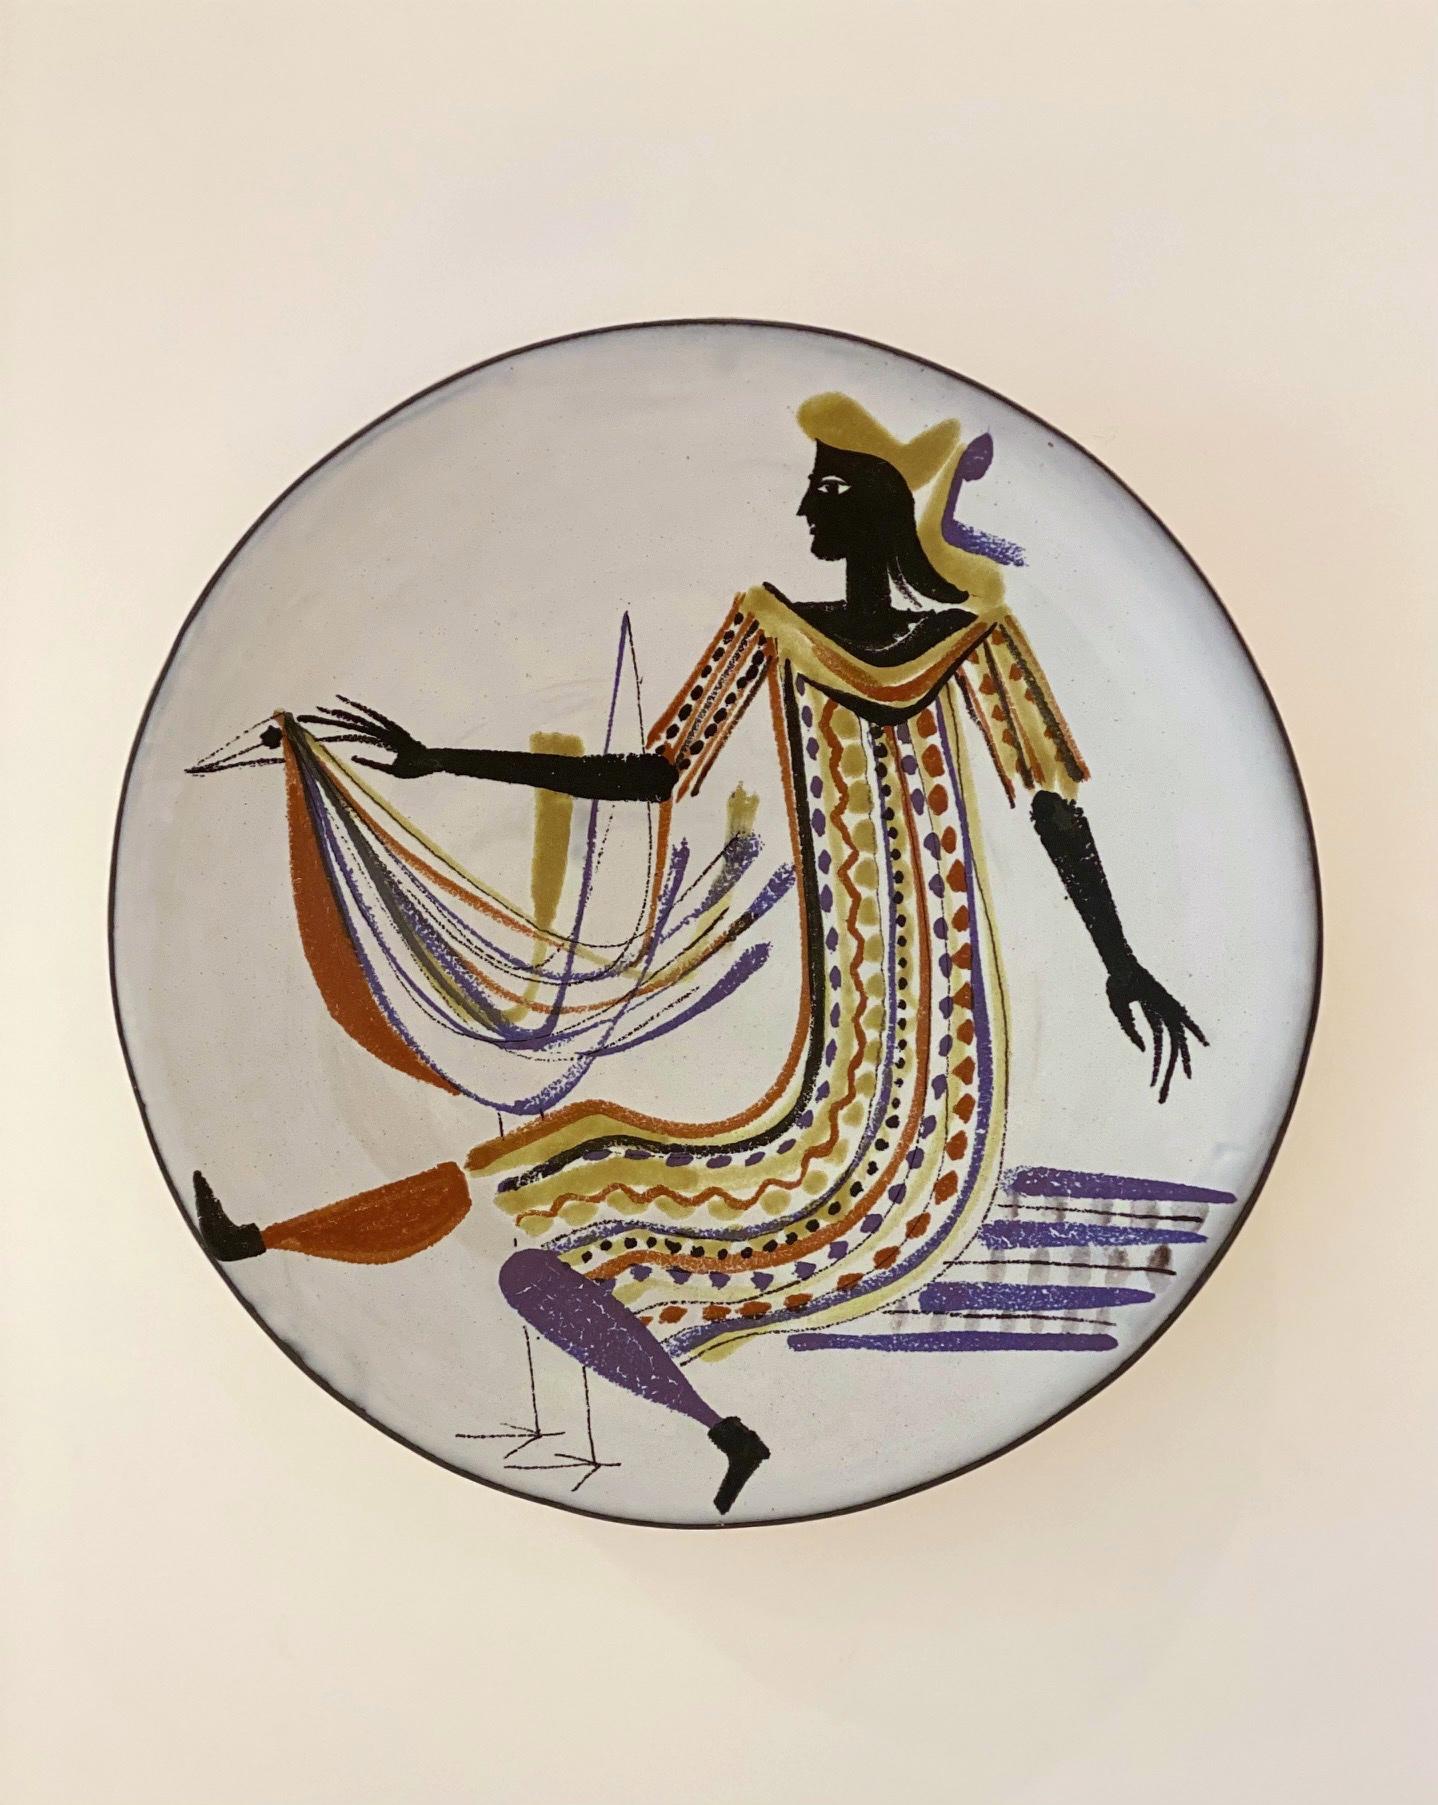 Roger Capron (1922-2006)
Roger Capron studied at Art appliqués of Paris from 1938 to 1943 before teaching drawing in the same establishment from 1945. In 1946, he settled in Vallauris where he created a ceramic workshop.

Large dish, faience tin